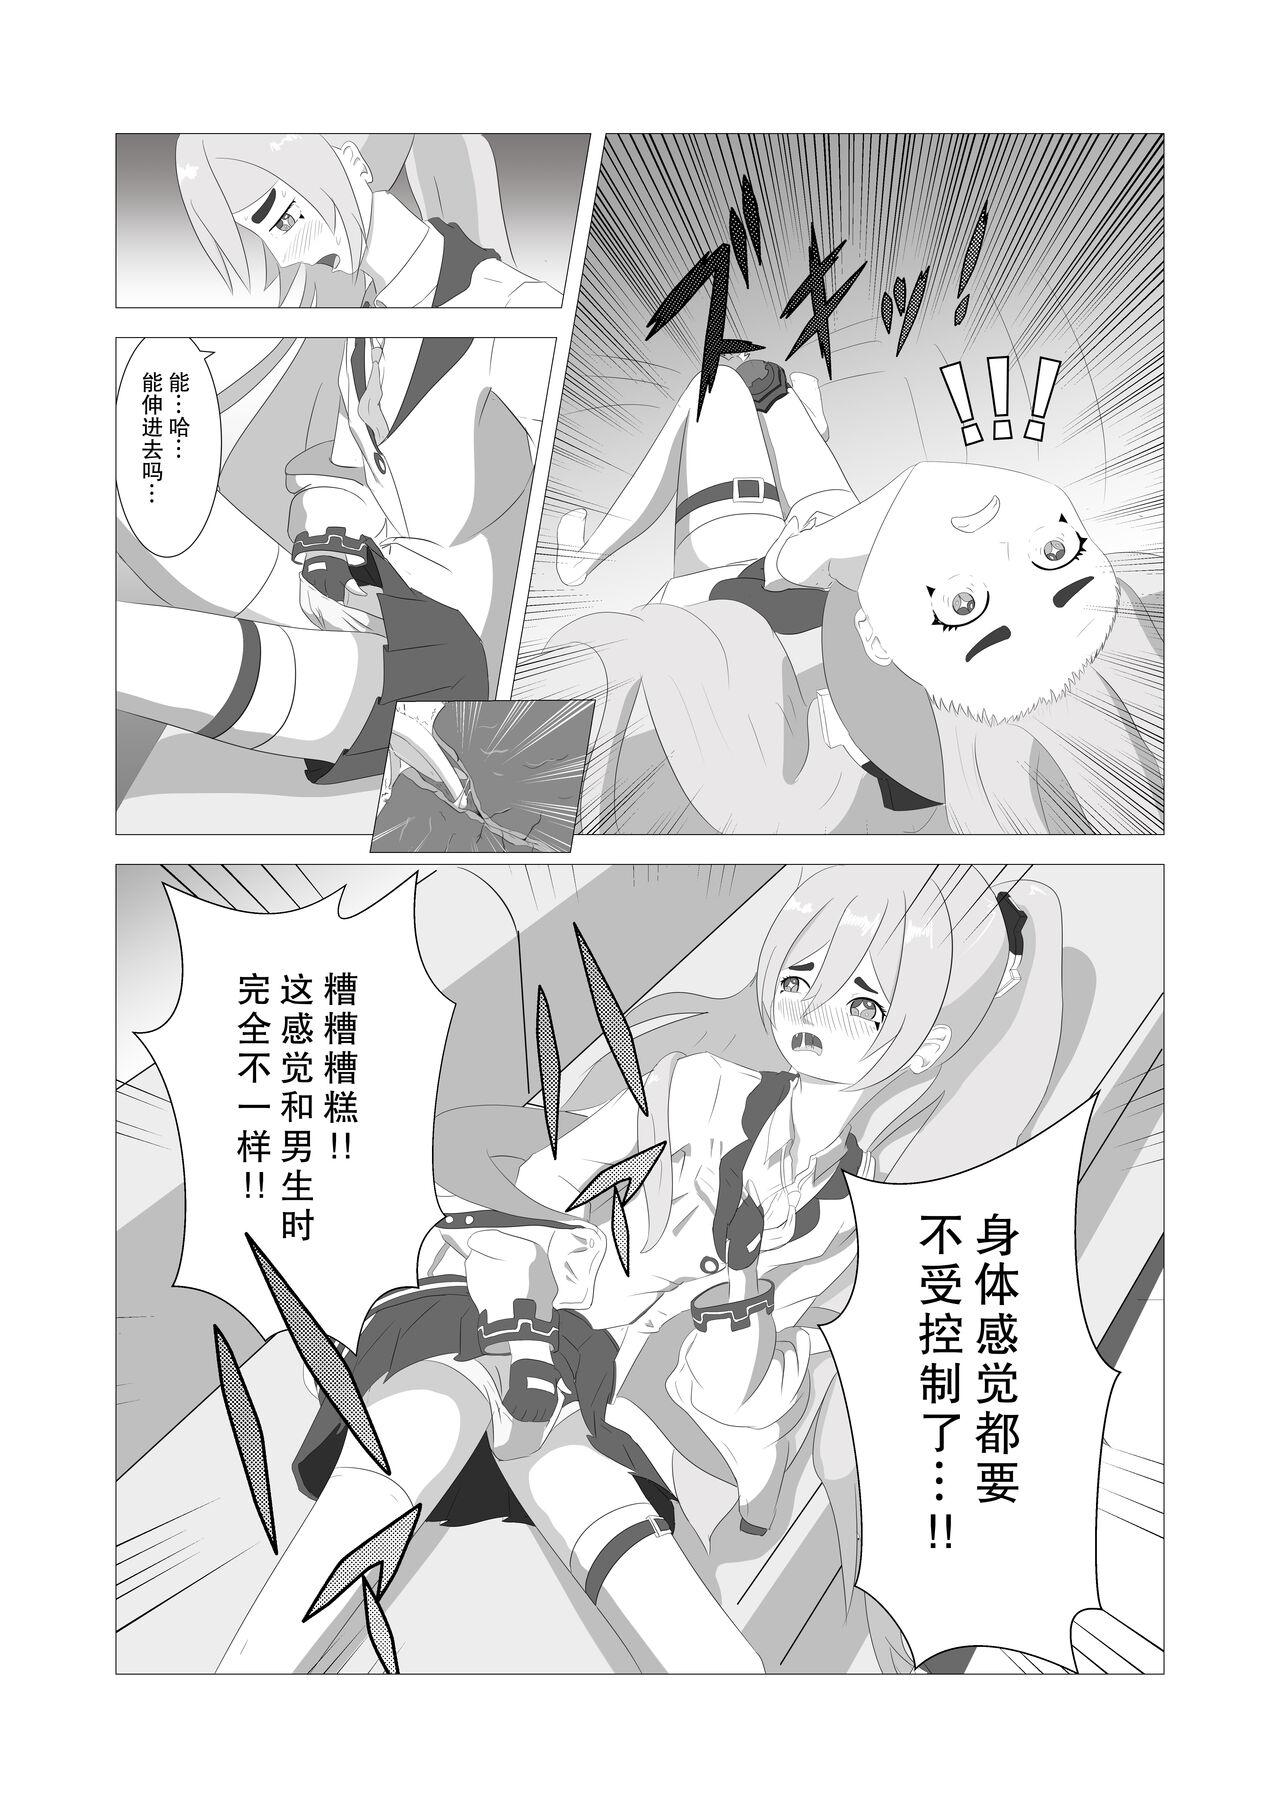 Spreading 皮物档案 - Blue archive Lesbo - Page 10